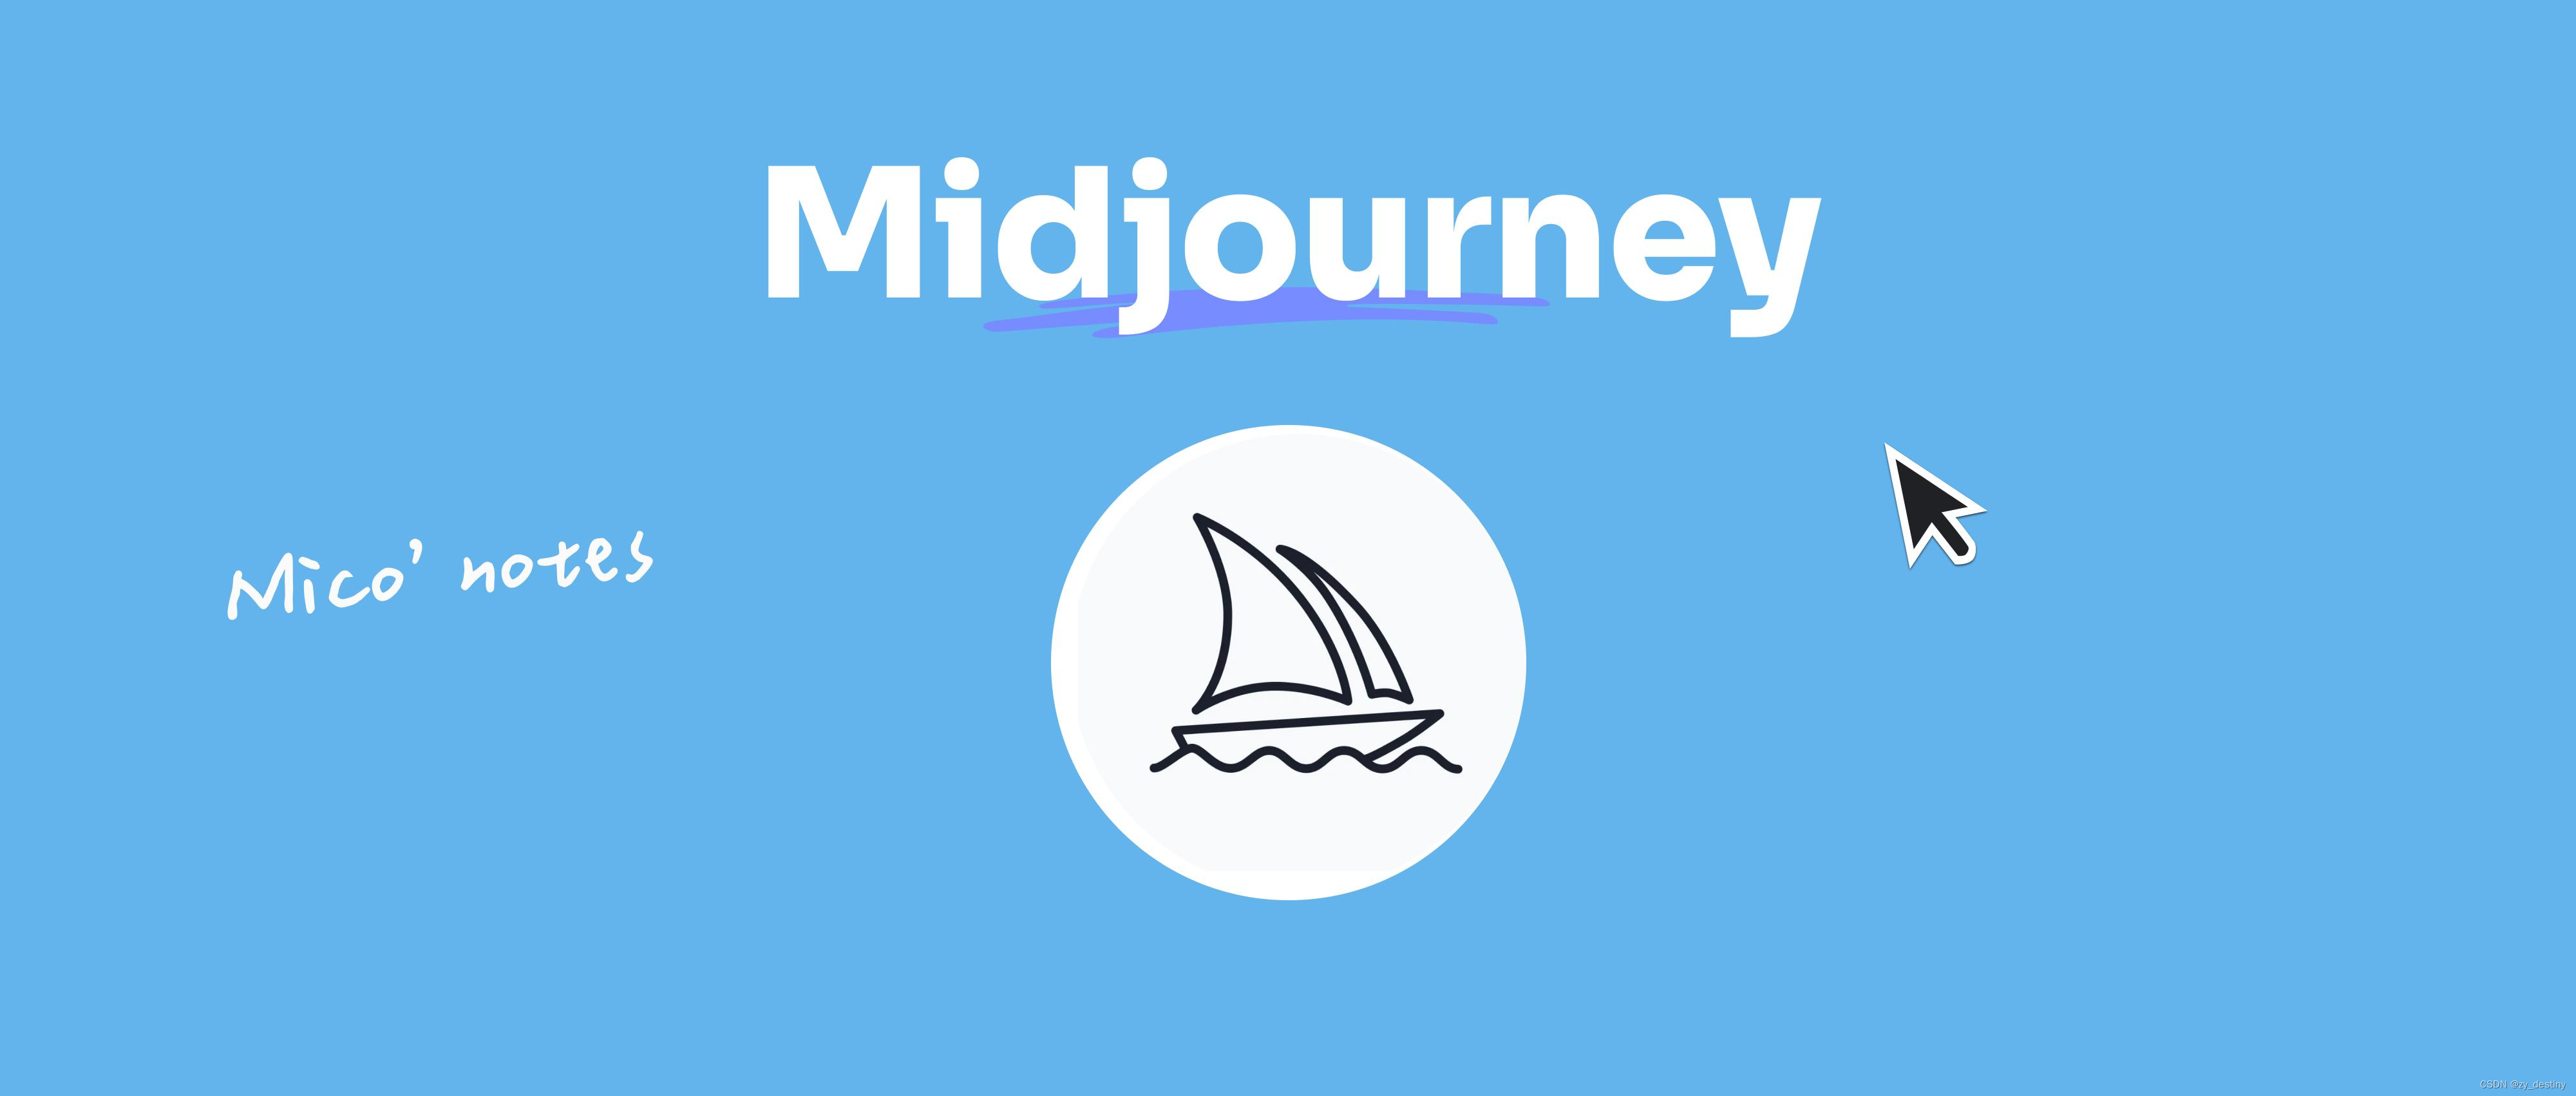 【<span style='color:red;'>Midjourney</span>】<span style='color:red;'>Midjourney</span>根据prompt提示<span style='color:red;'>词</span><span style='color:red;'>生成</span>黑白色<span style='color:red;'>图片</span>